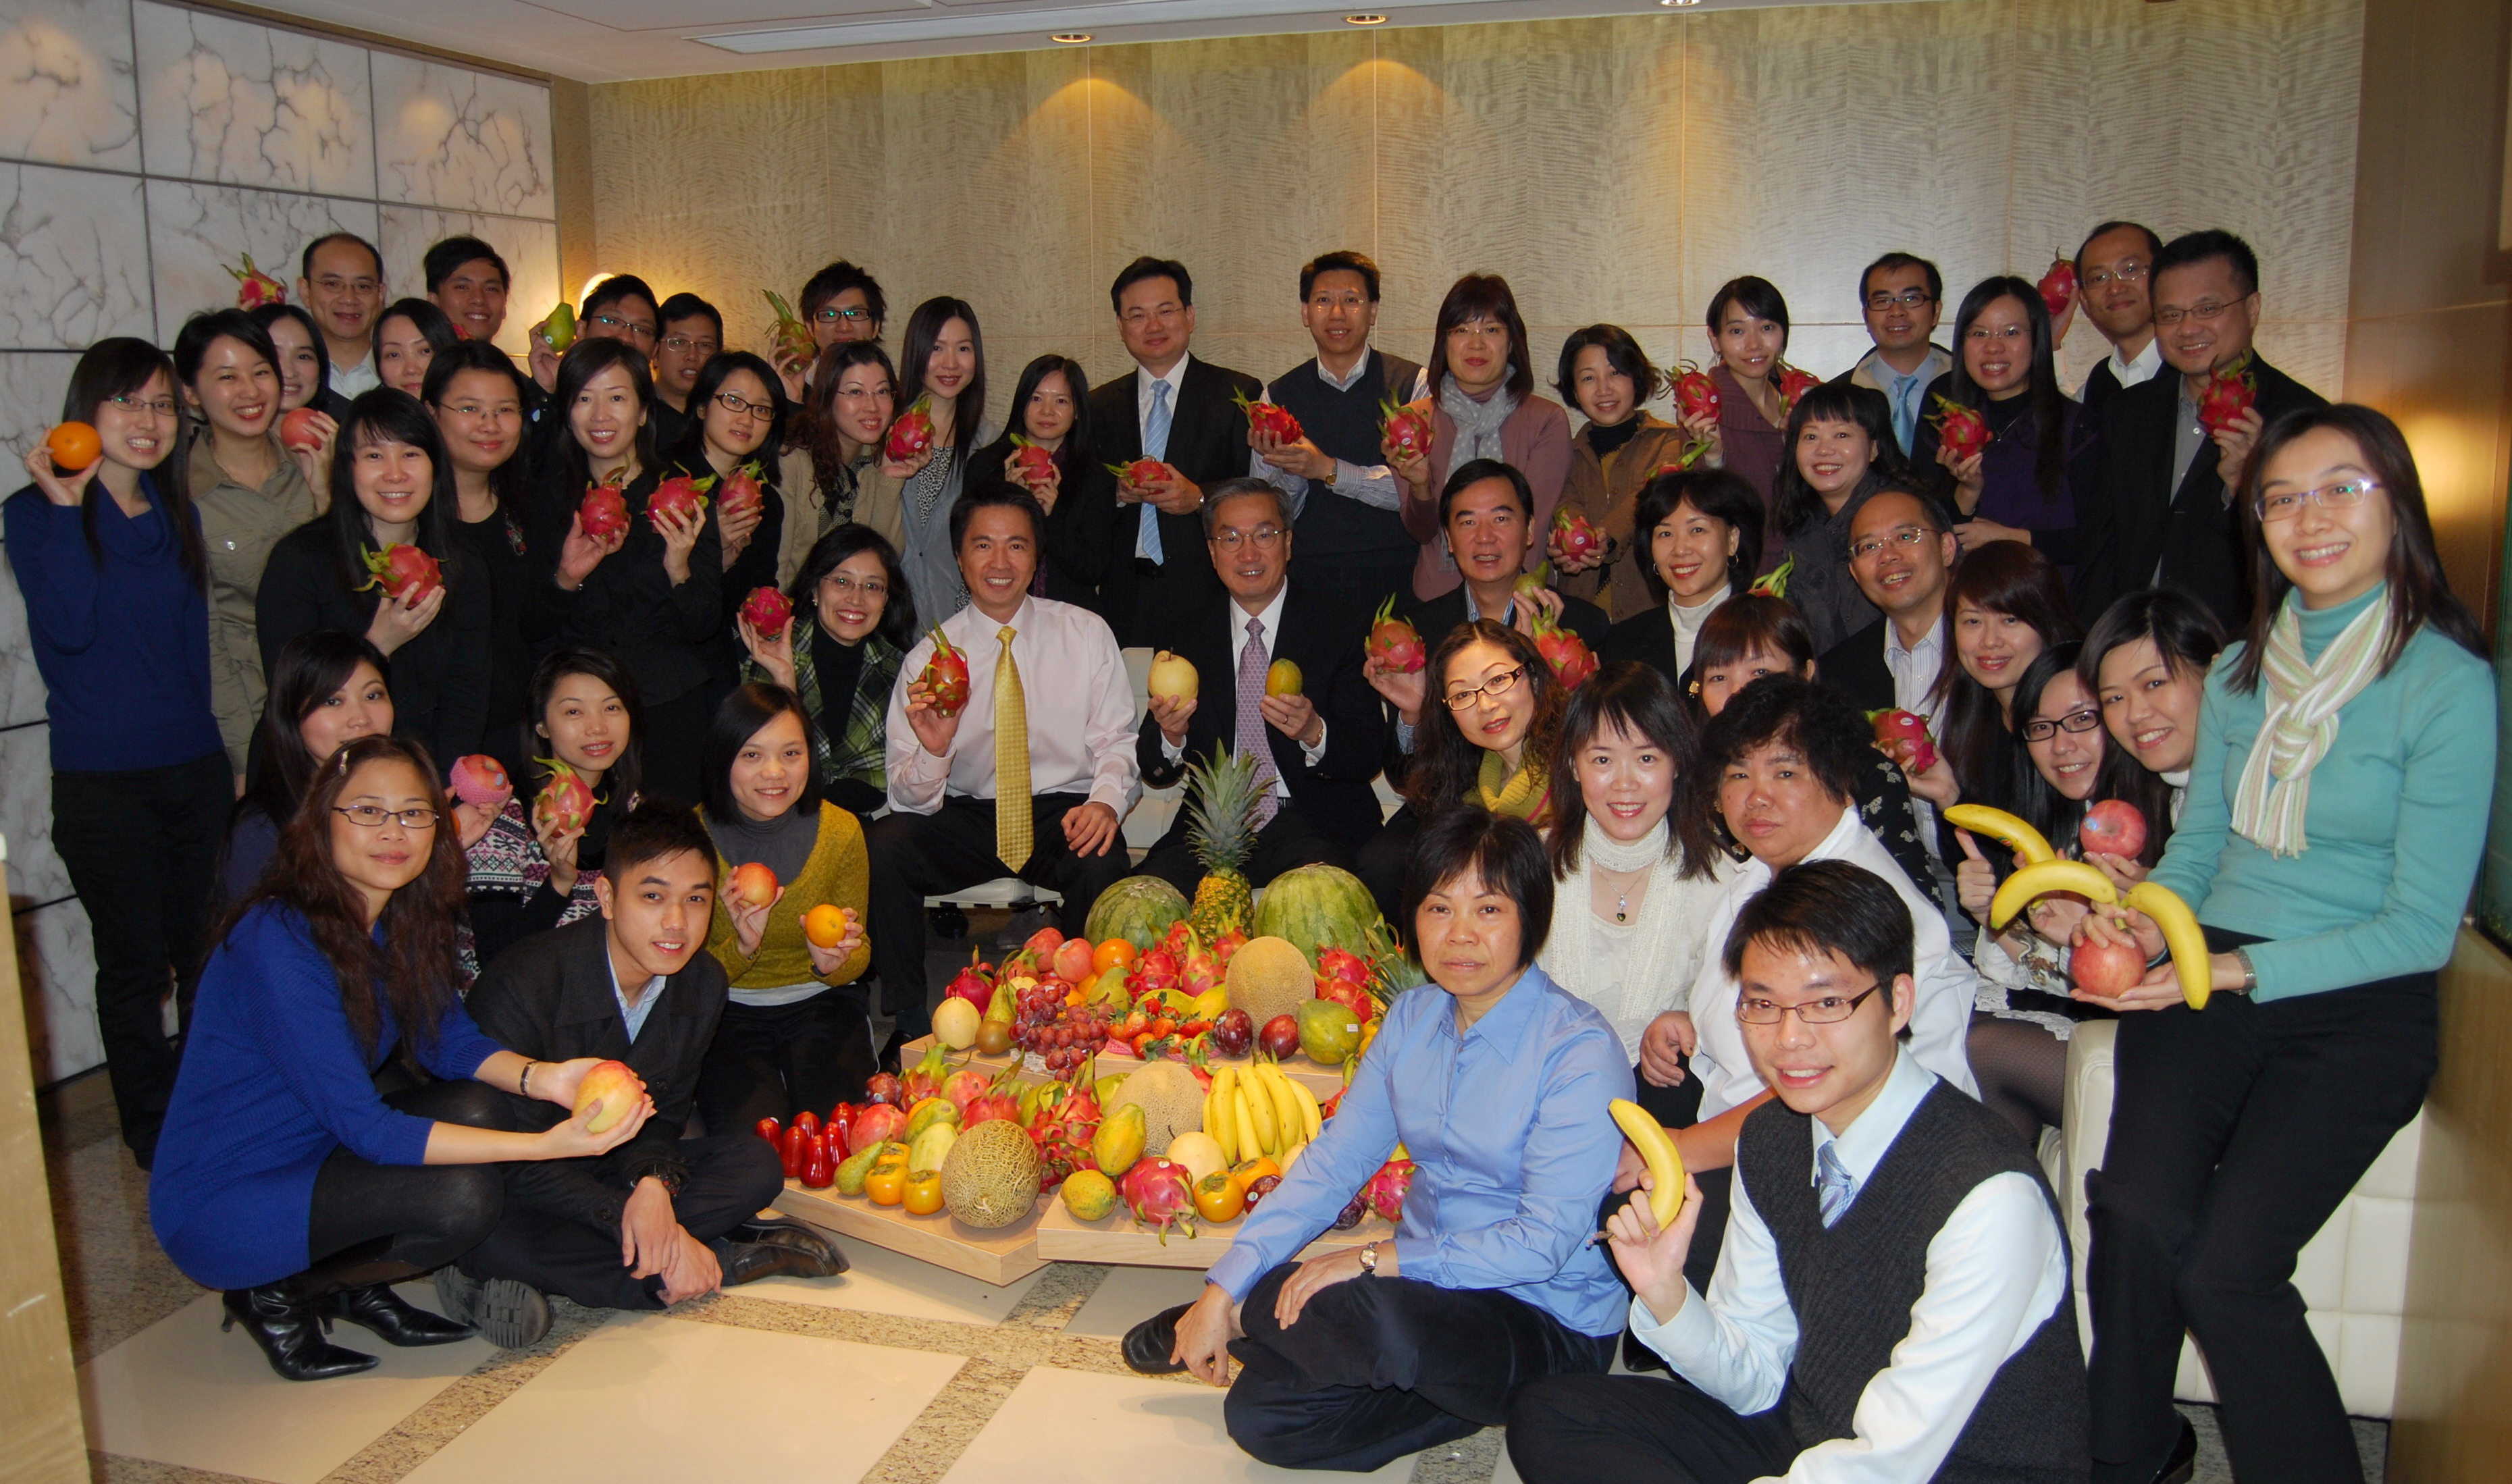 NWS Holdings “Fruit for Care” campaign to promote healthy lifestyle